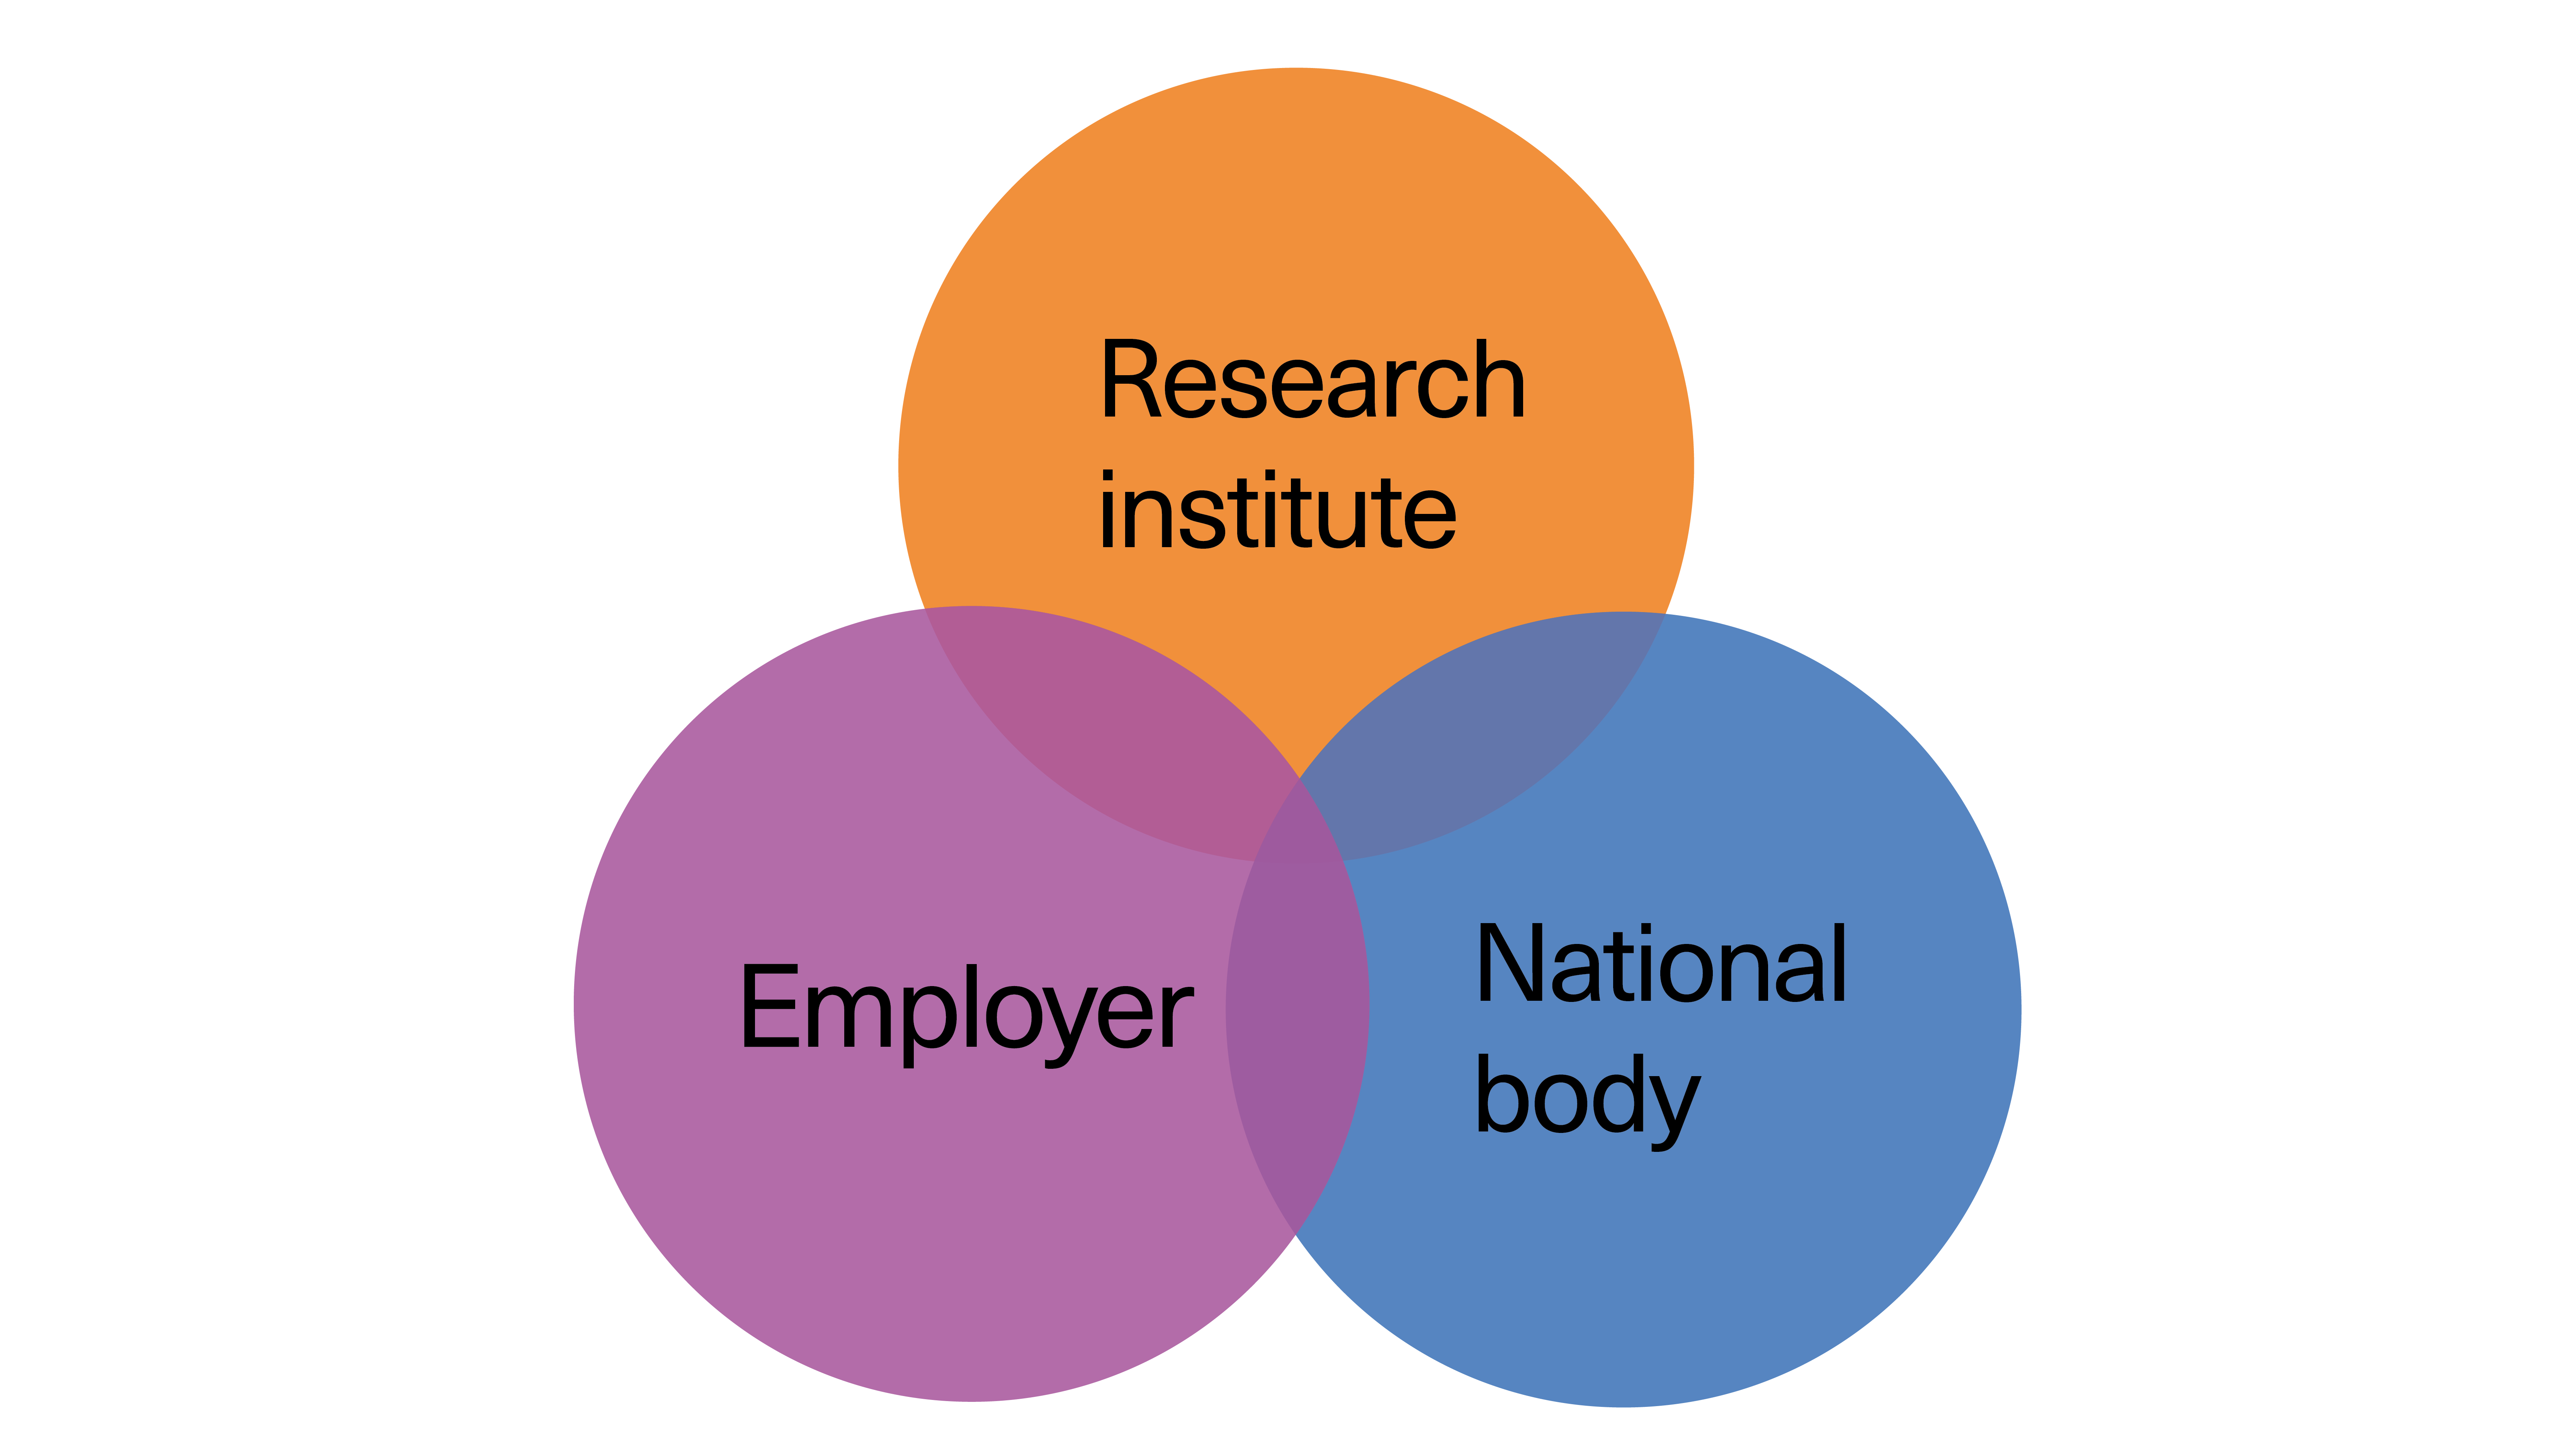 A venn diagram showing the intersection between 'Research institute', 'Employer' and 'National body'